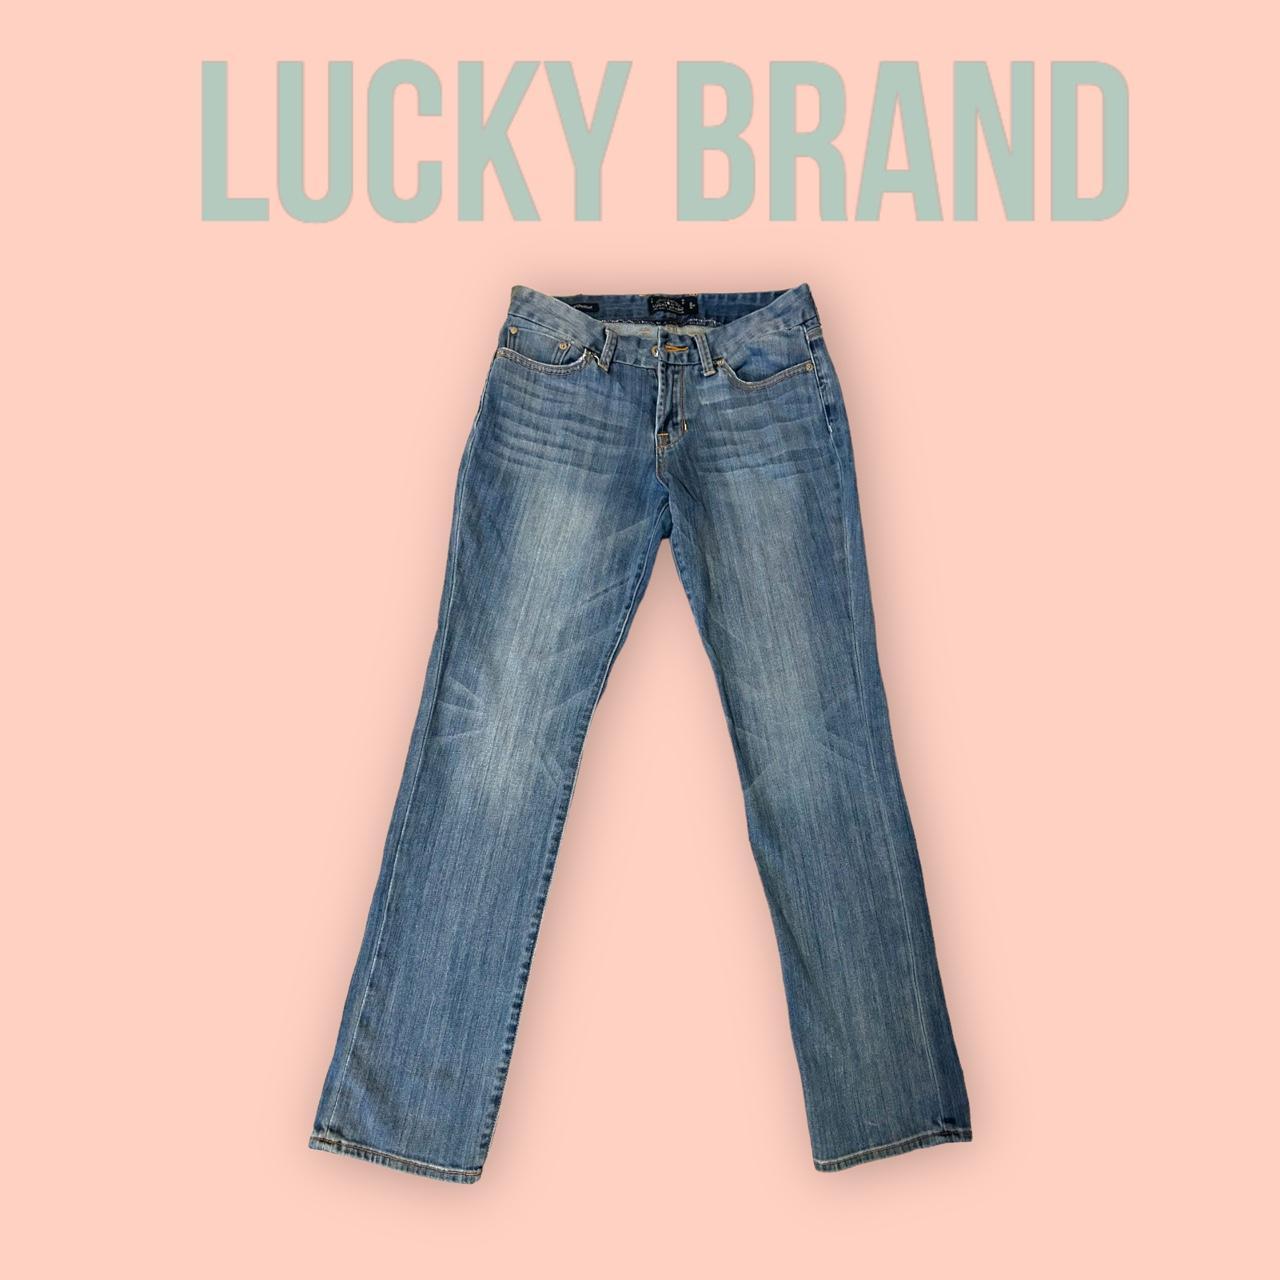 Lucky Brand Jeans for Women